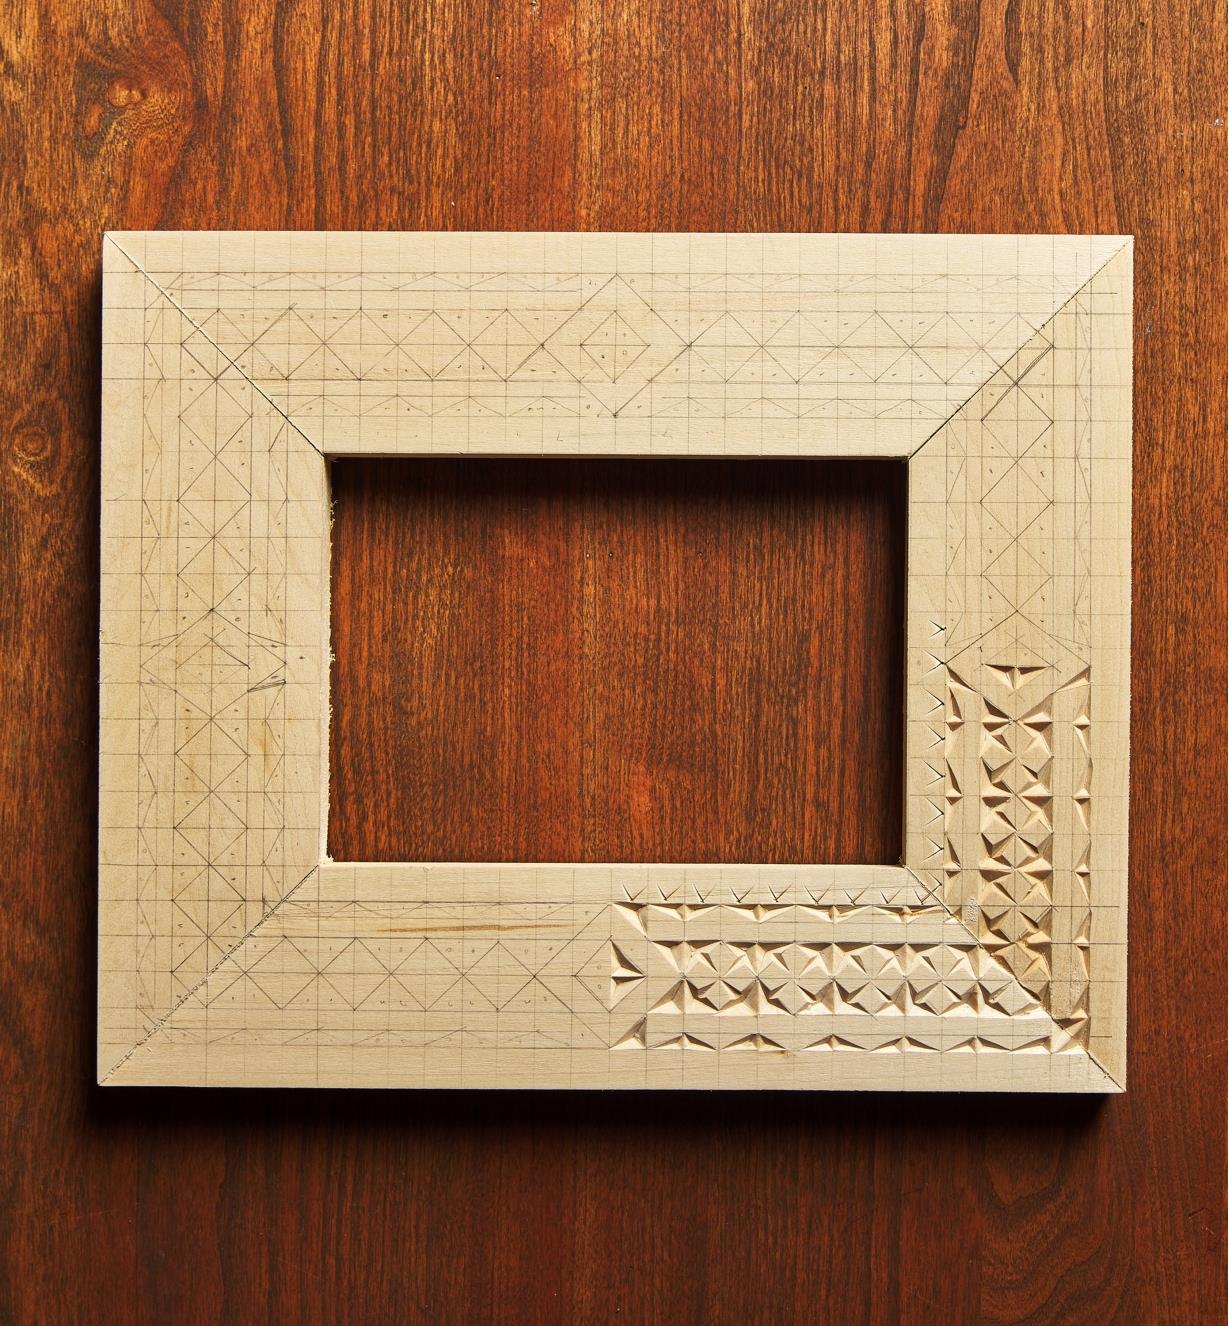 A partially completed chip carved frame